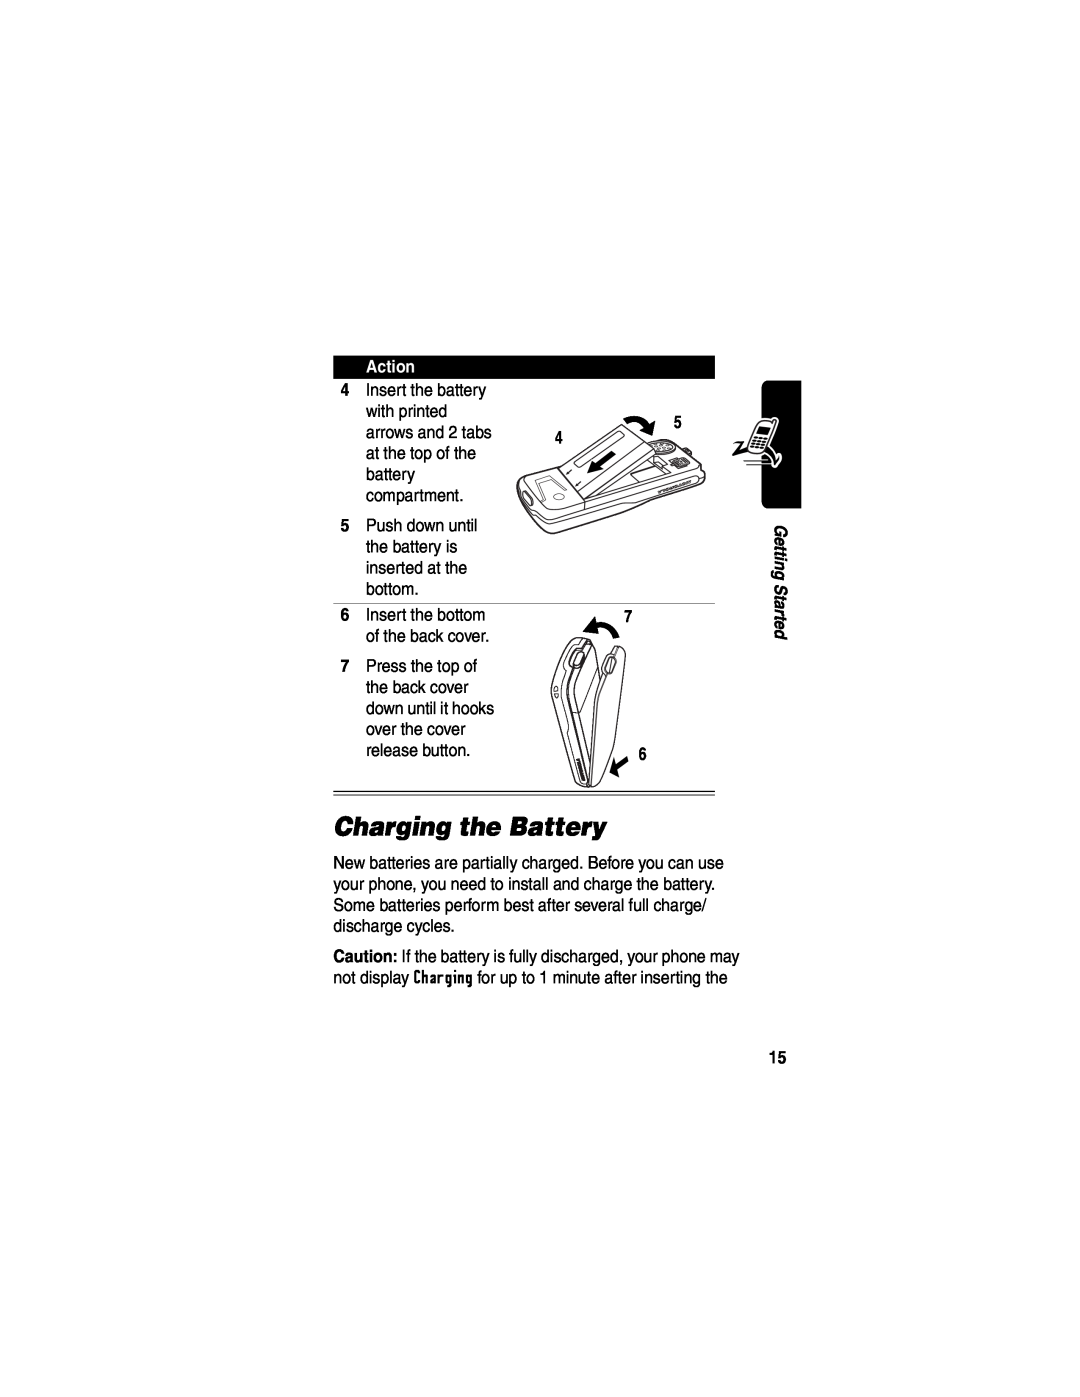 Motorola WIRELESS TELEPHONE manual Charging the Battery, Action 